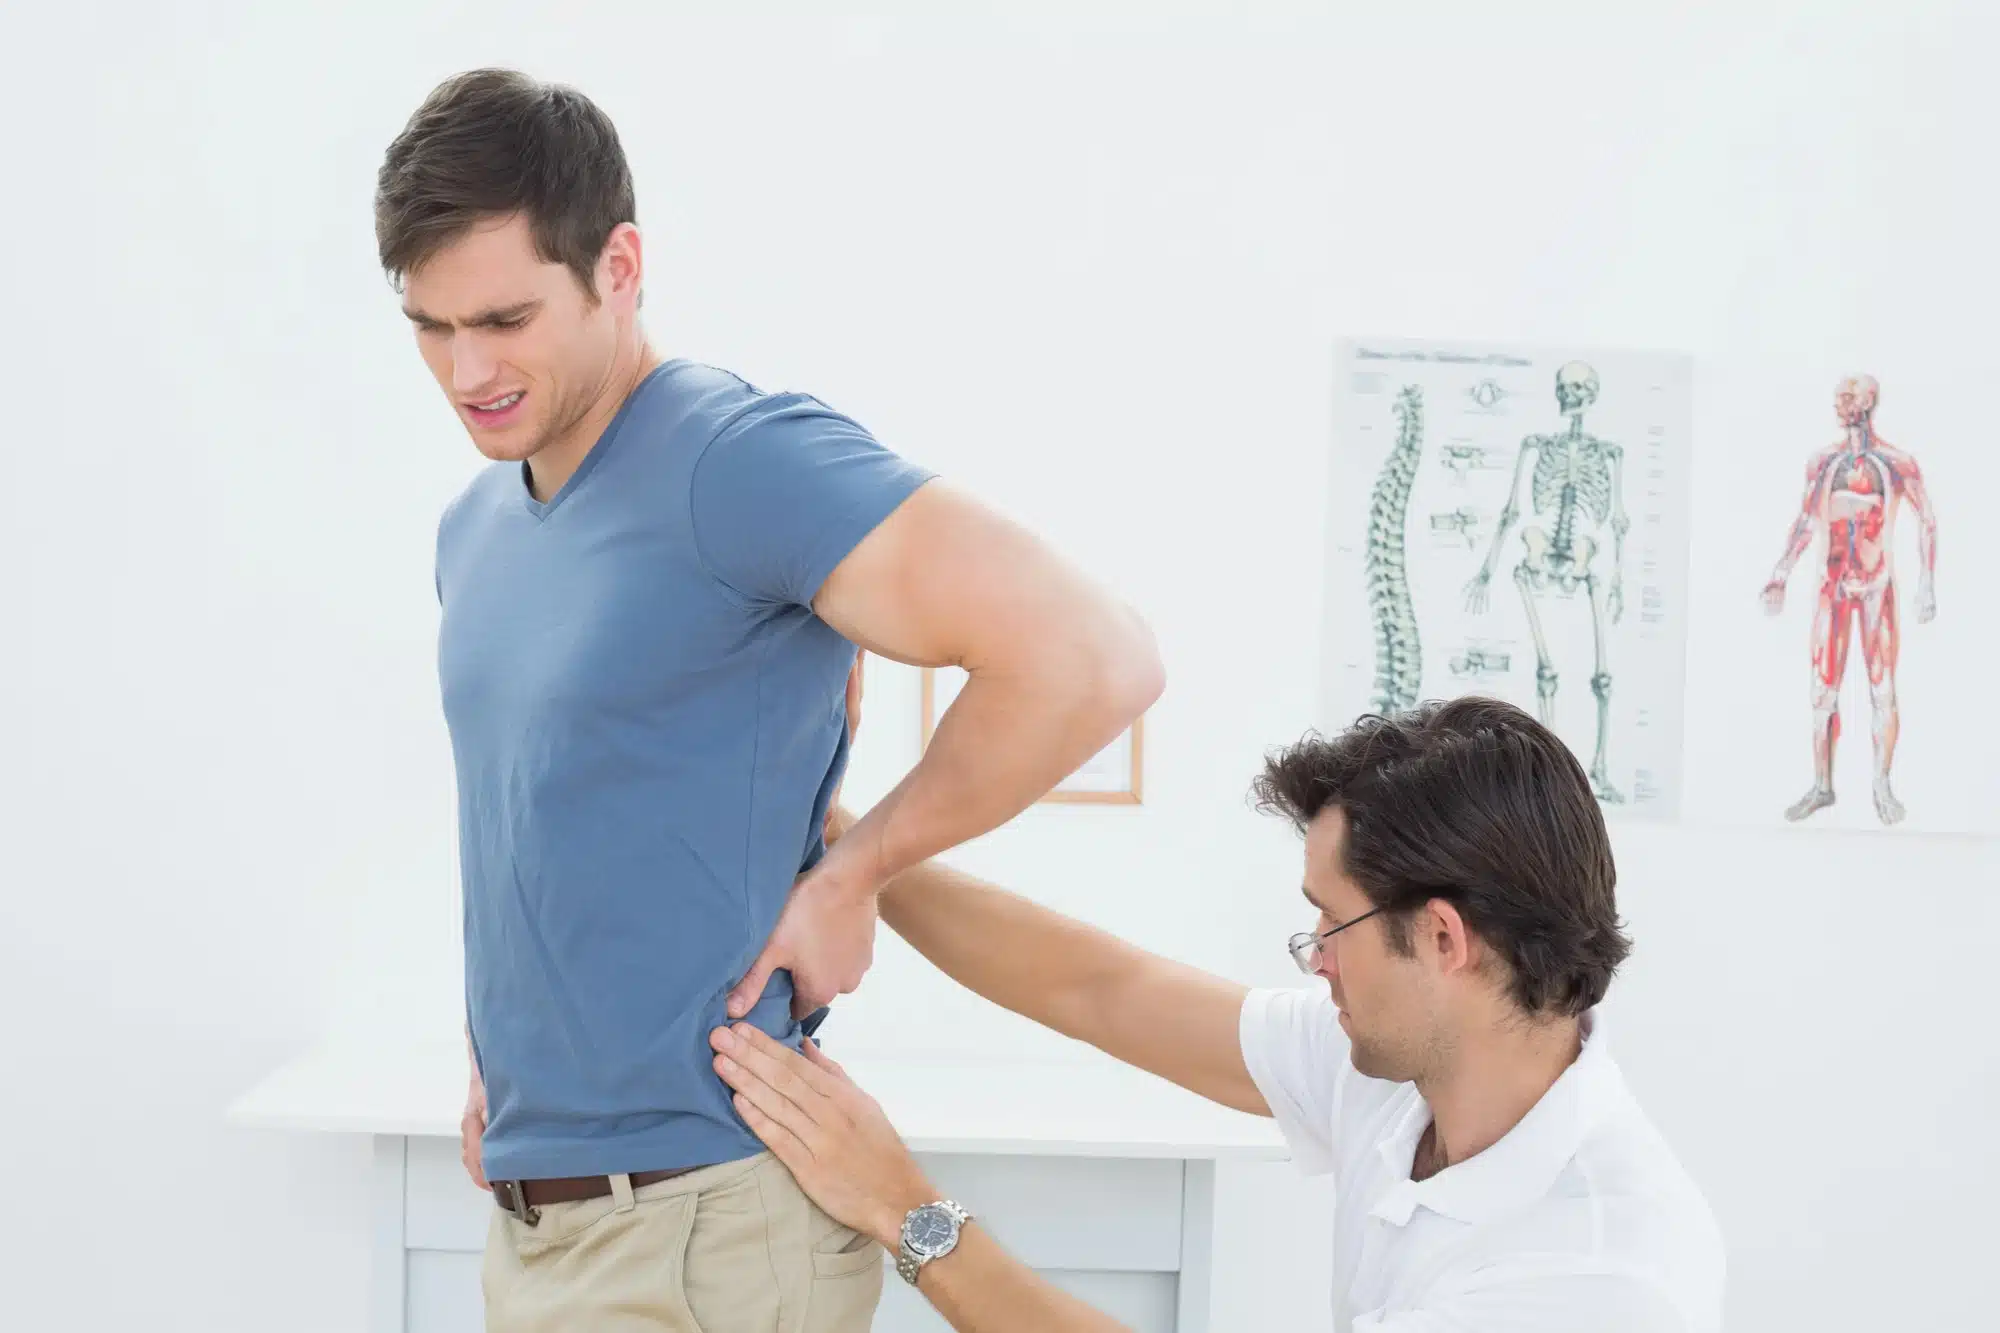 man at doctor, before getting hip injection for pain relief